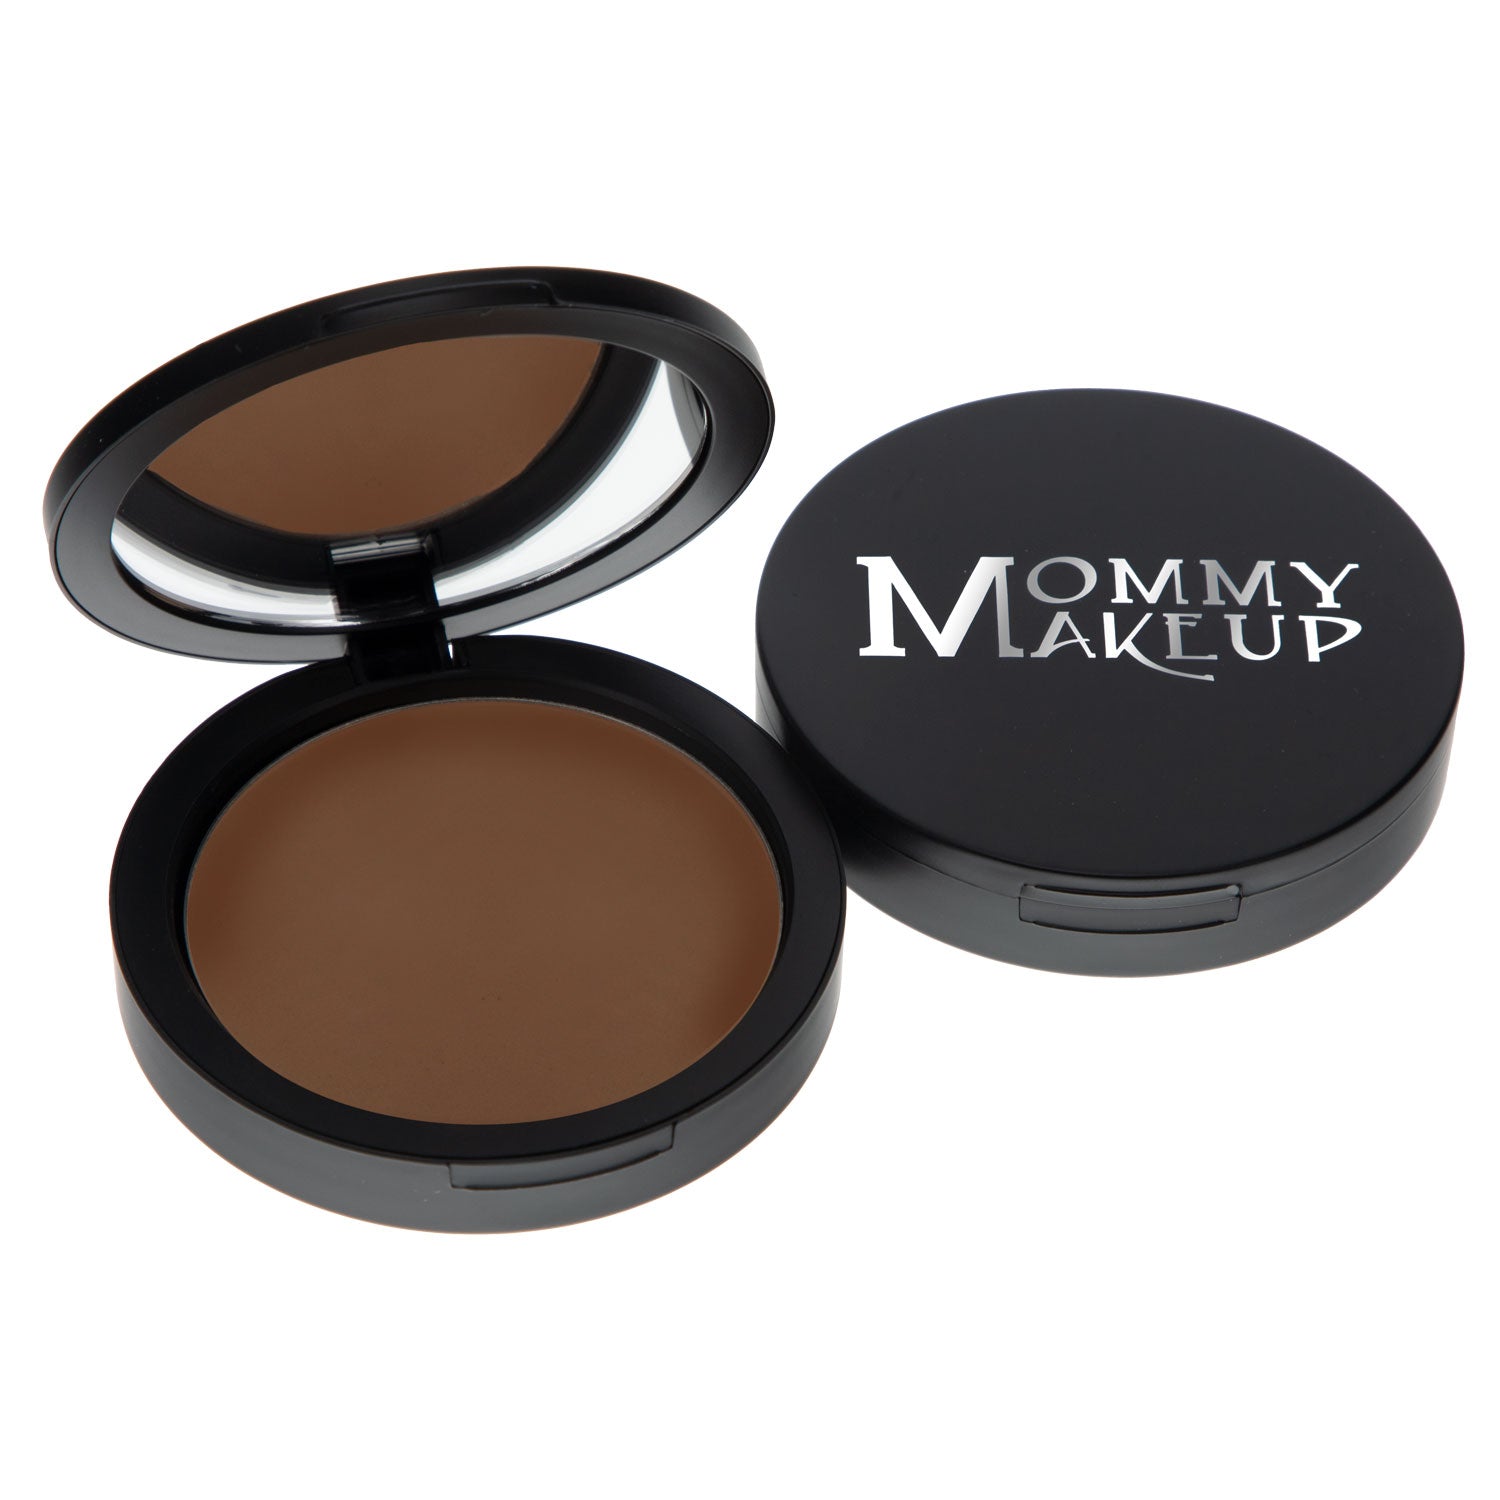 Mineral Based 4-in-1 Product is your PRESSED Powder, Foundation, SPF 15 and Soft Focus Finish All in One! No loose powder mess! Formulated without talc, gluten, phthalates, fragrance, GMO, parabens, or corn.